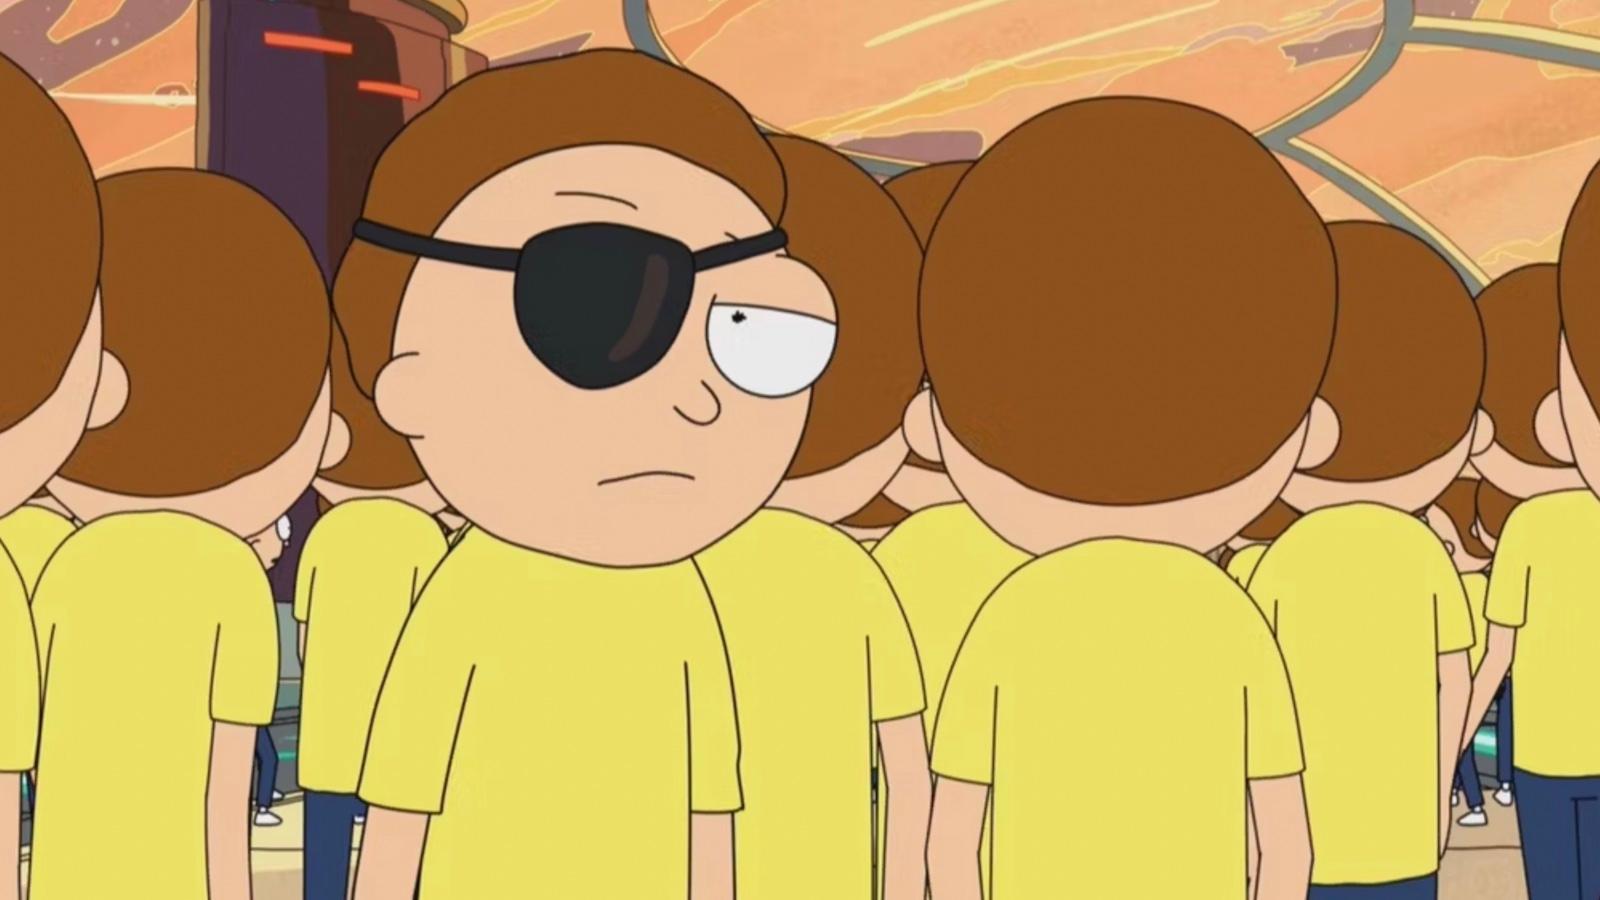 Evil Morty in Season 1 of Rick and Morty